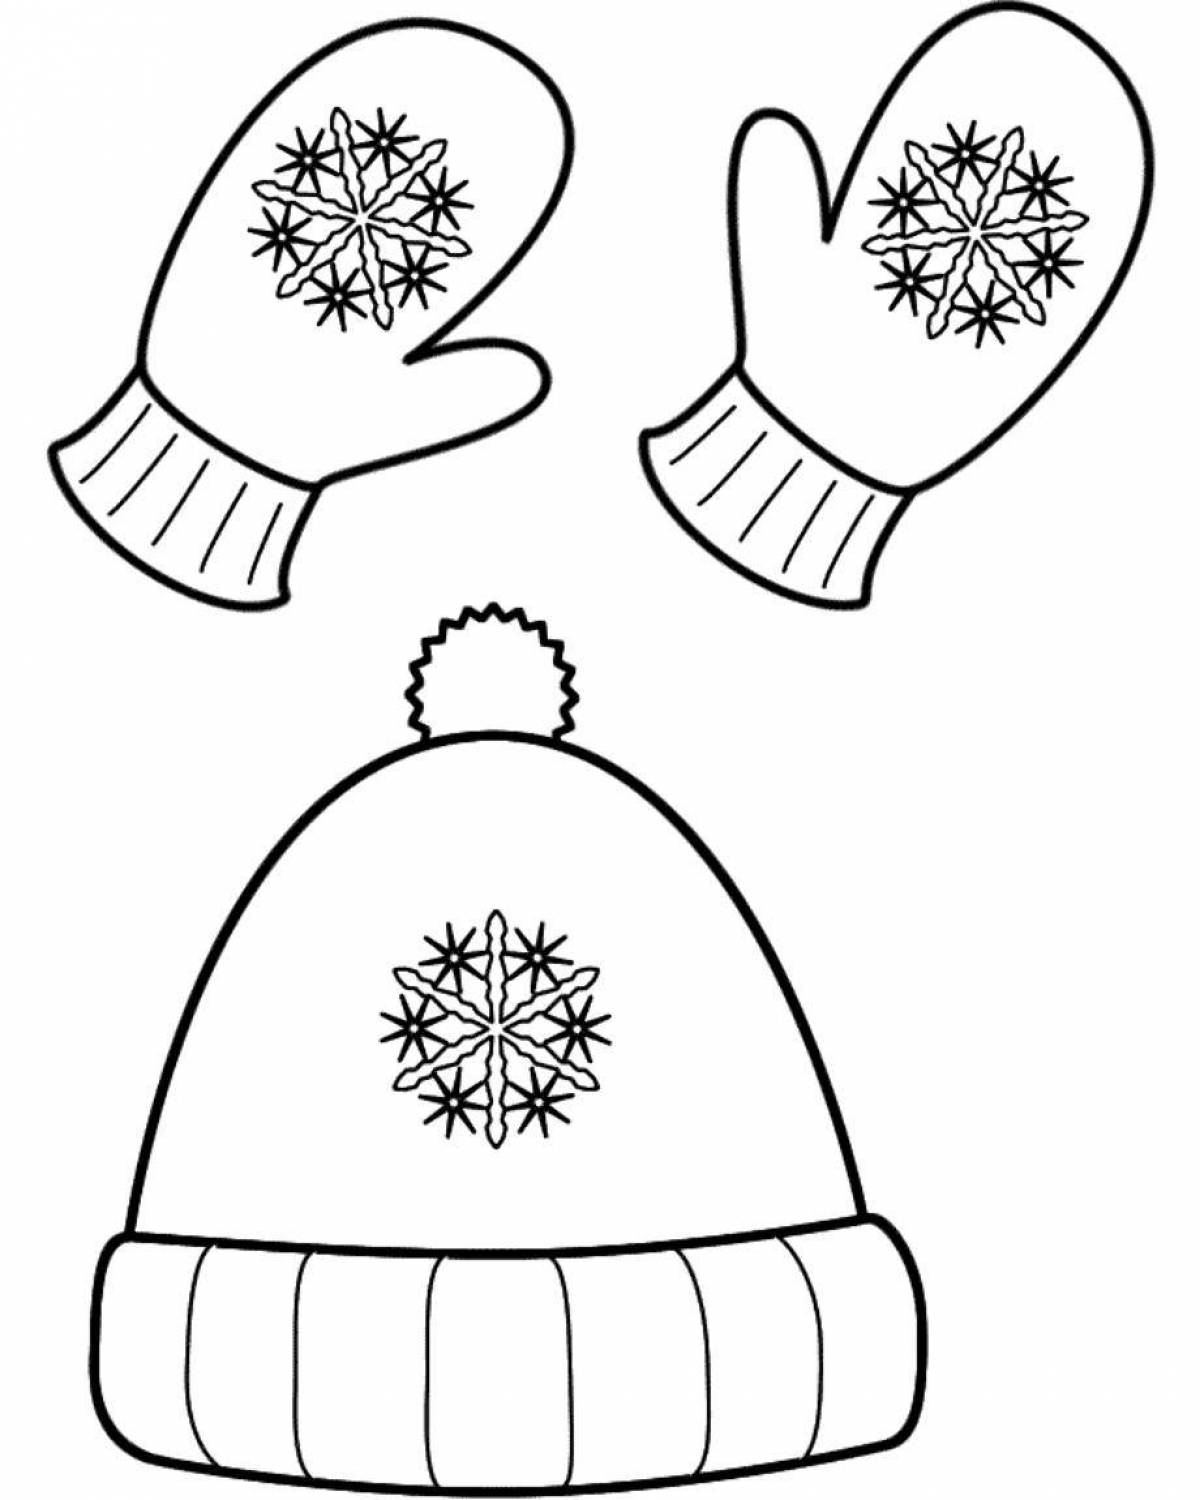 Coloring live hat and gloves